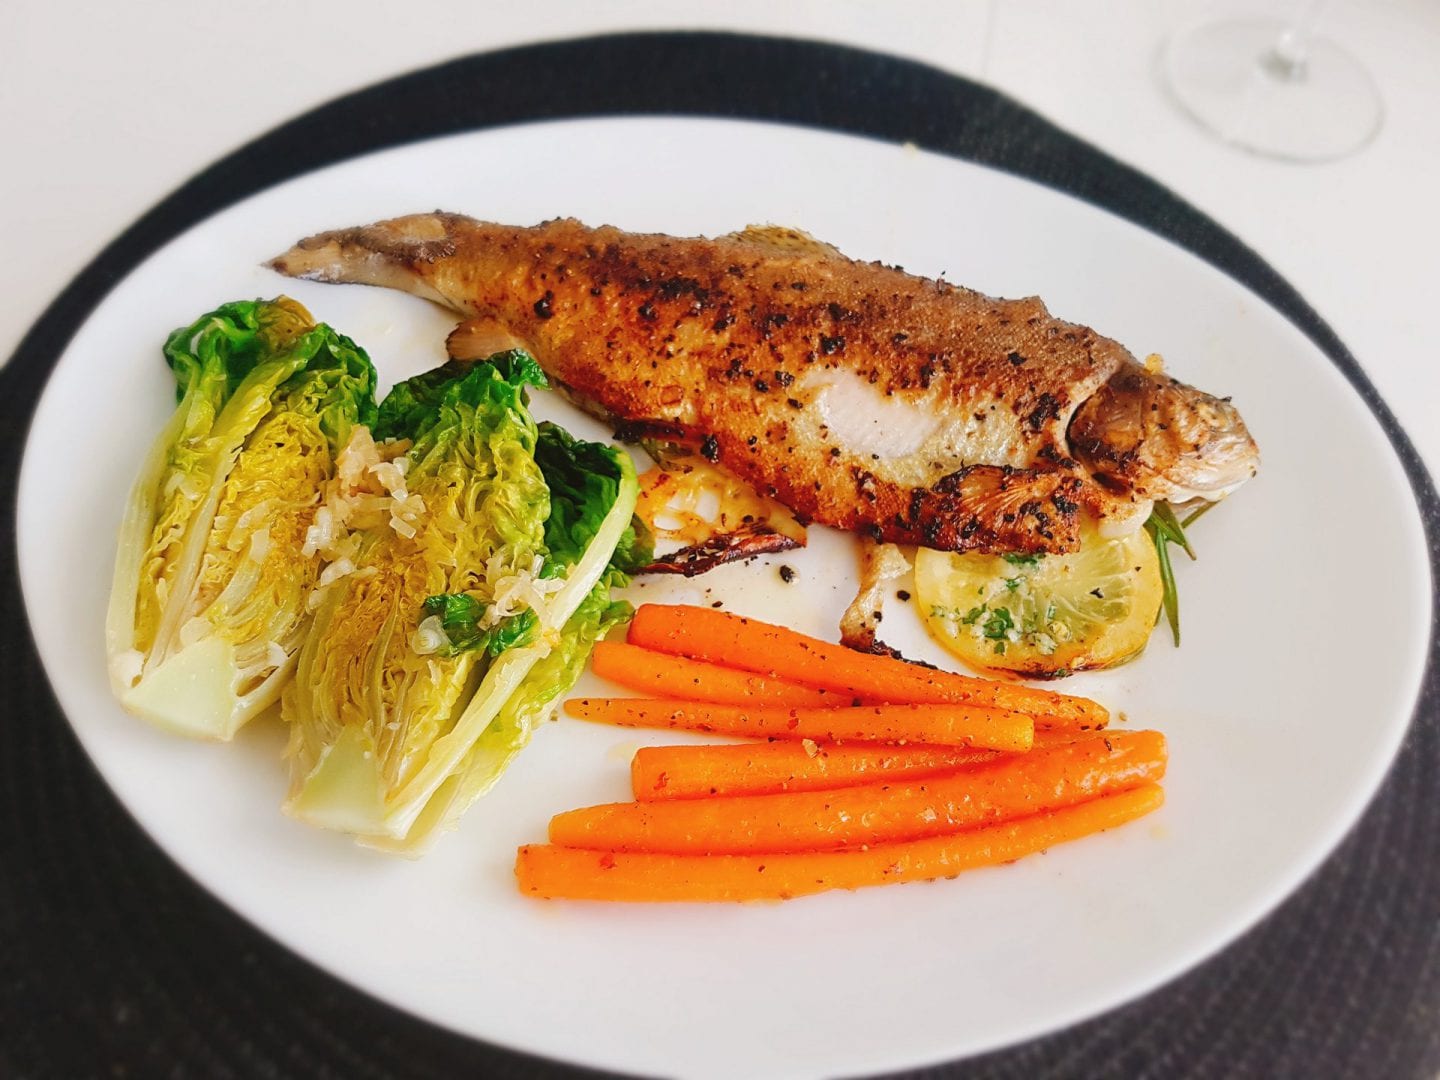 Fried trout with vegetables